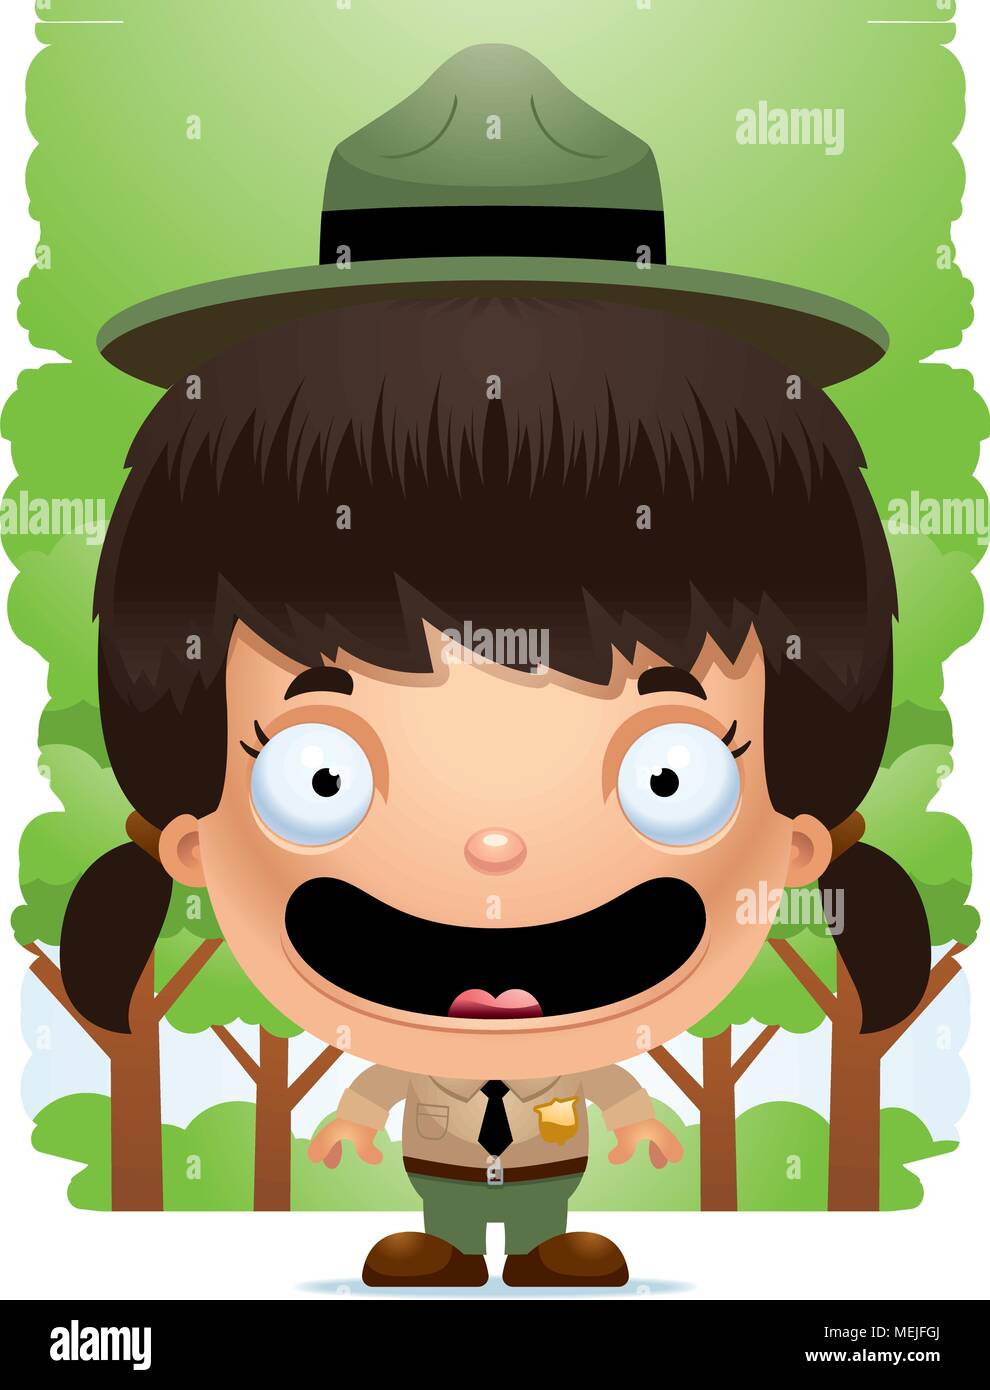 A Cartoon Illustration Of A Girl Park Ranger Standing And Smiling Stock